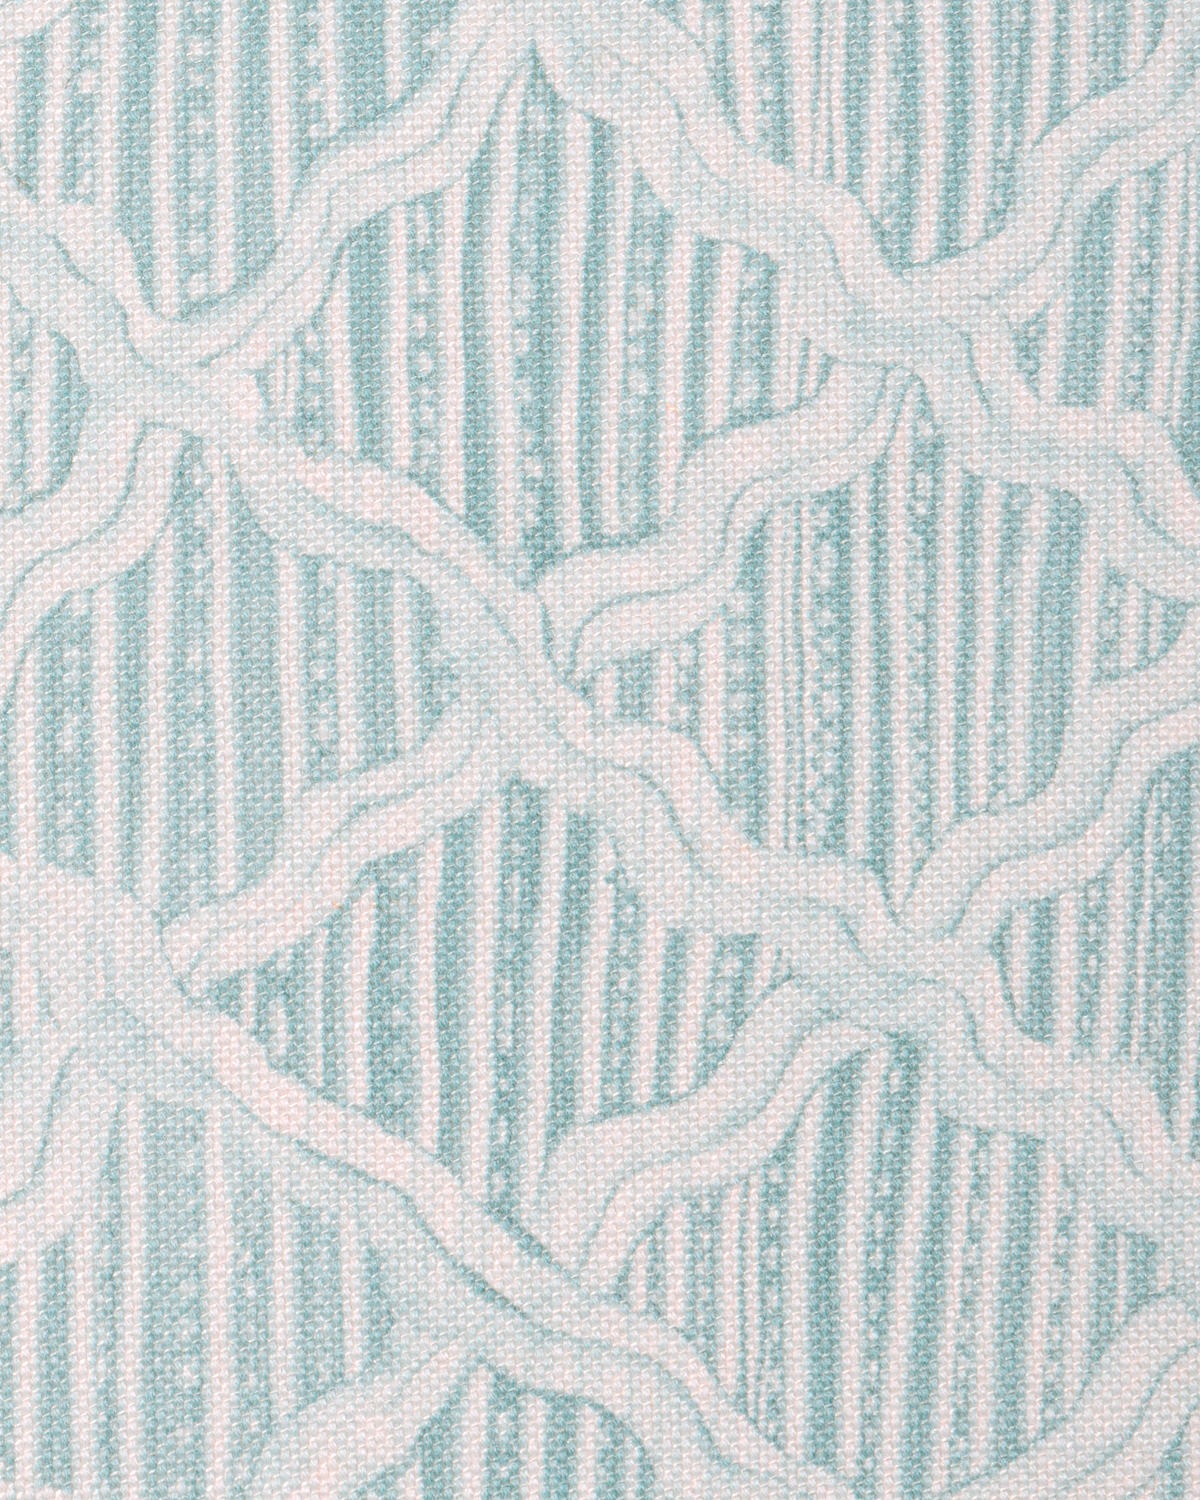 Carved Ogee Fabric in Lagoon Blue